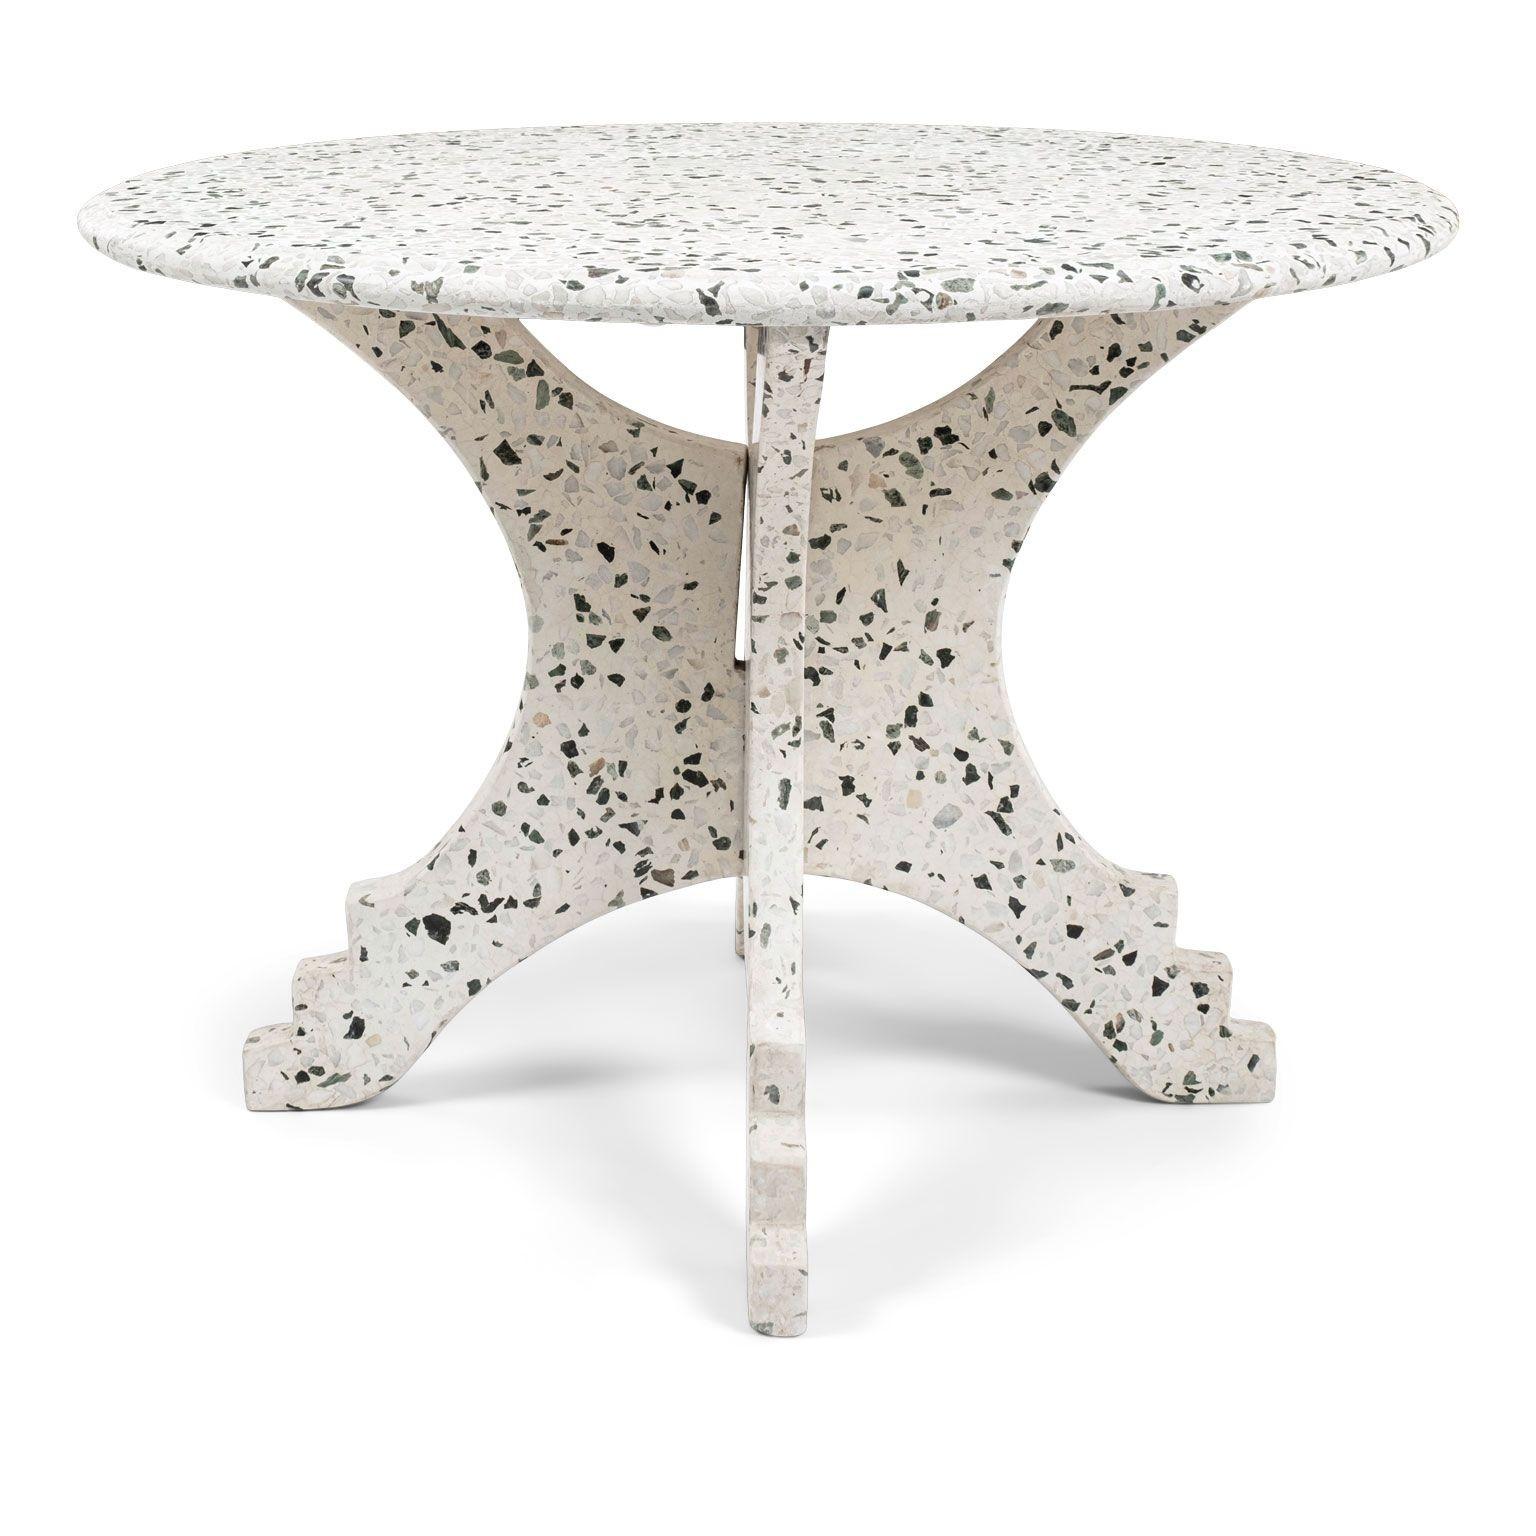 Large round vintage blue and white terrazzo table on terrazzo two-part base. Terrazzo table circa 1950-1969. Blue, subtly colored gray-blue and light terracotta stones set within off-white. Stepped feet. Italy.